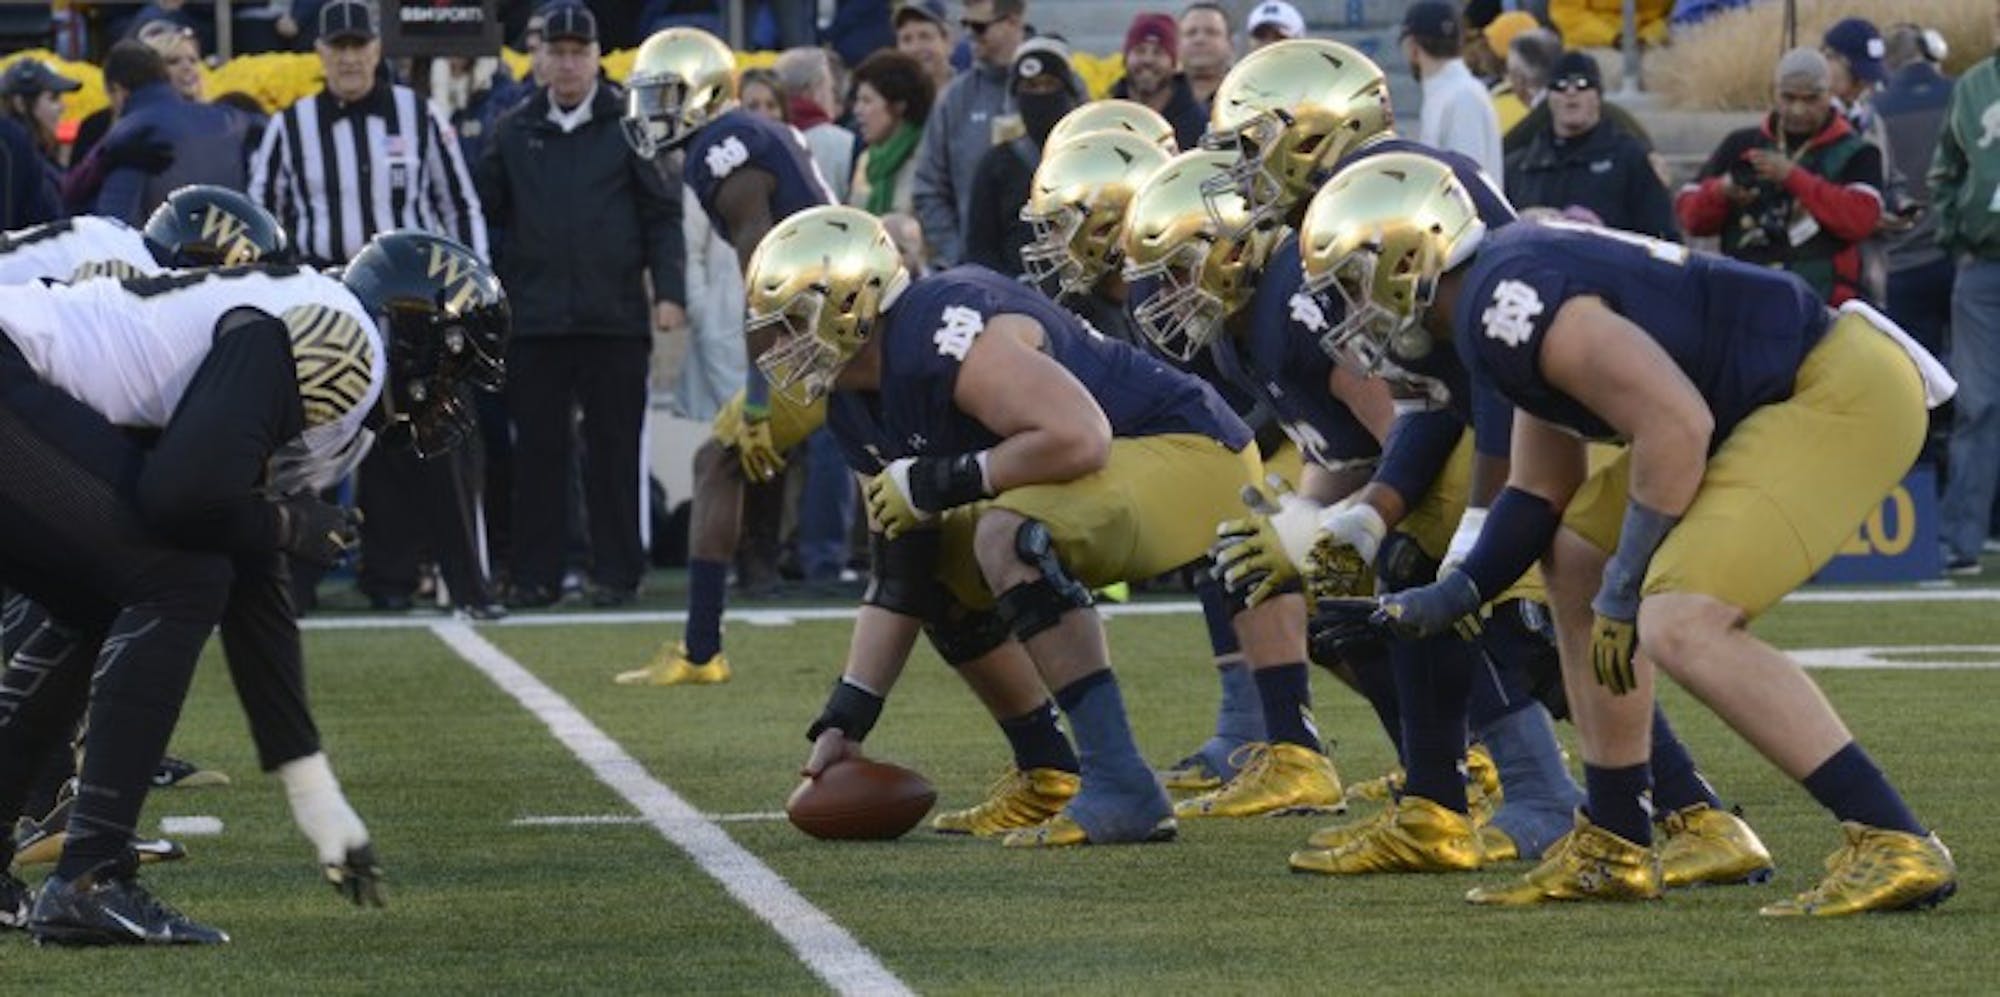 Graduate student center Nick Martin prepares to snap the ball during Notre Dame’s 28-7 win over Wake Forest on Saturday. Martin, a two-time captain, has helped lead the Irish to a 9-1 record this year.